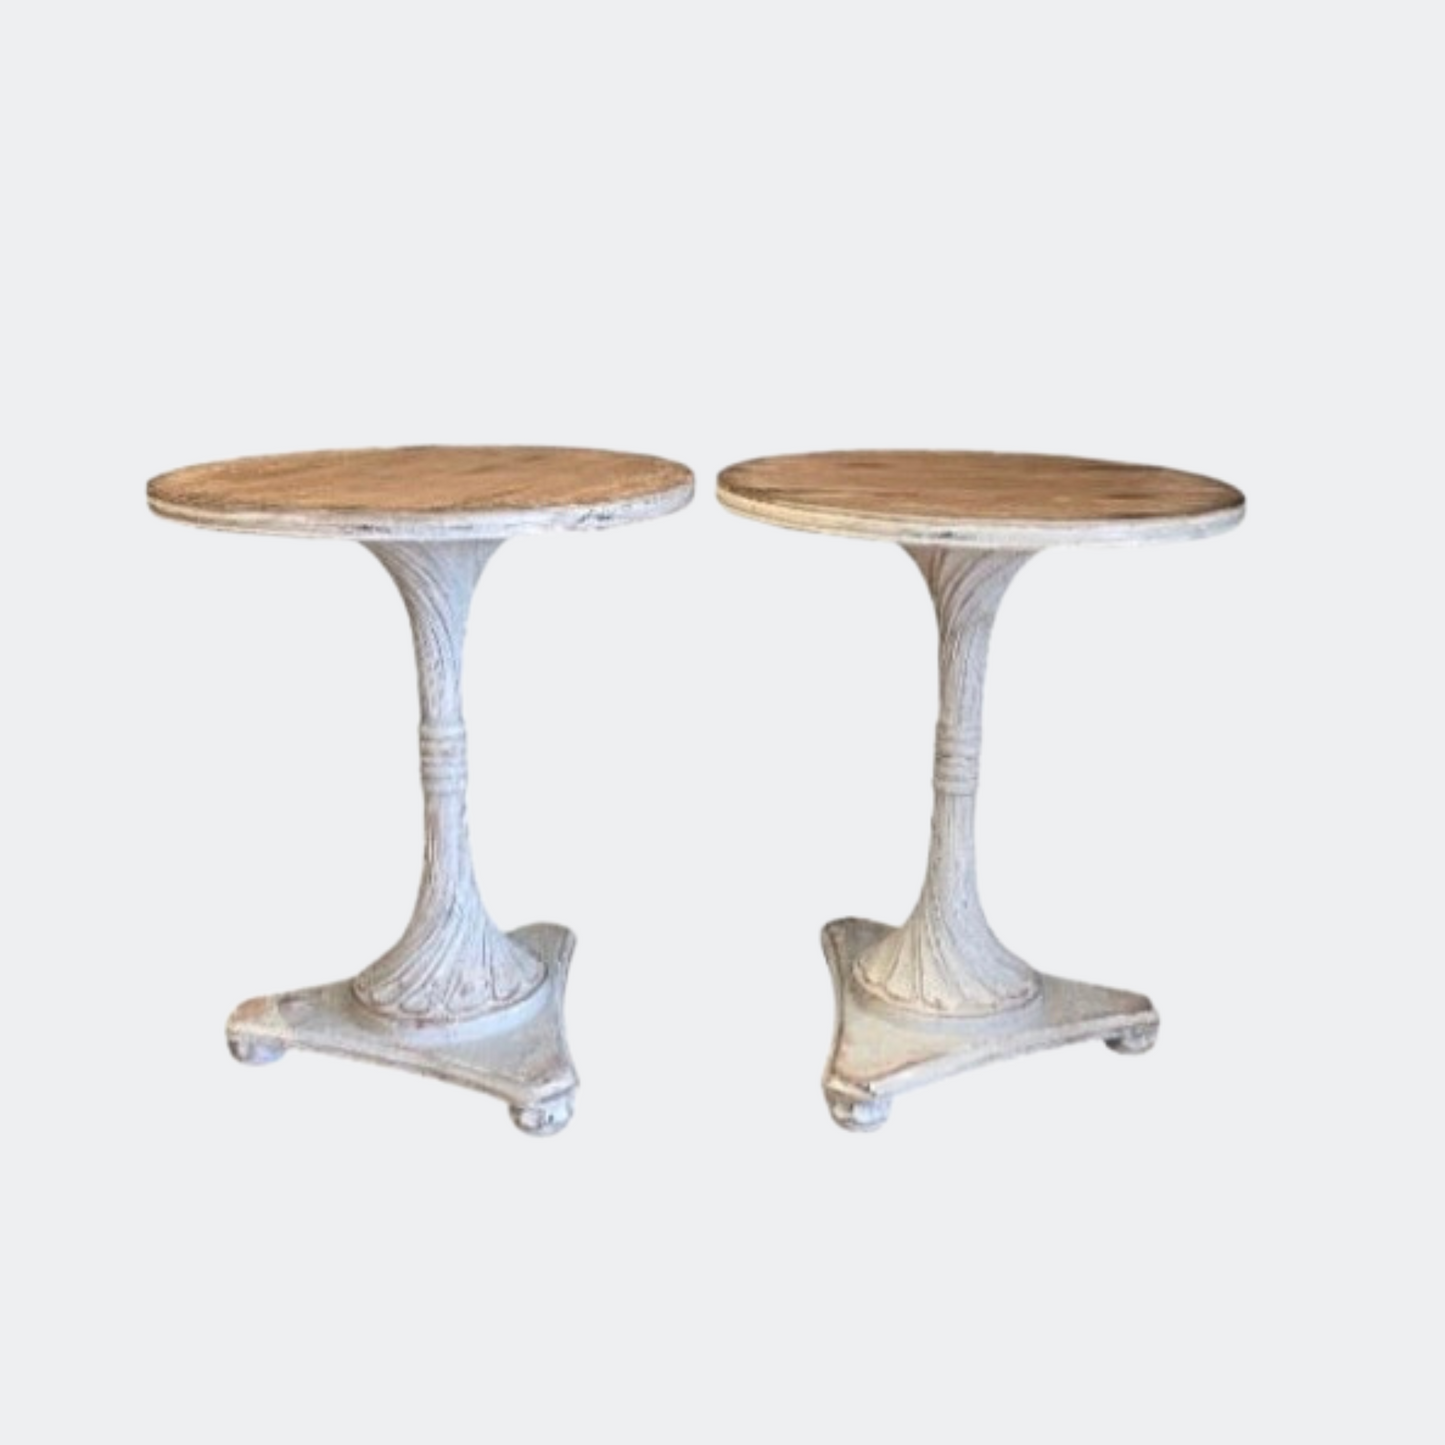 Pair of Rustic Carved Side Tables